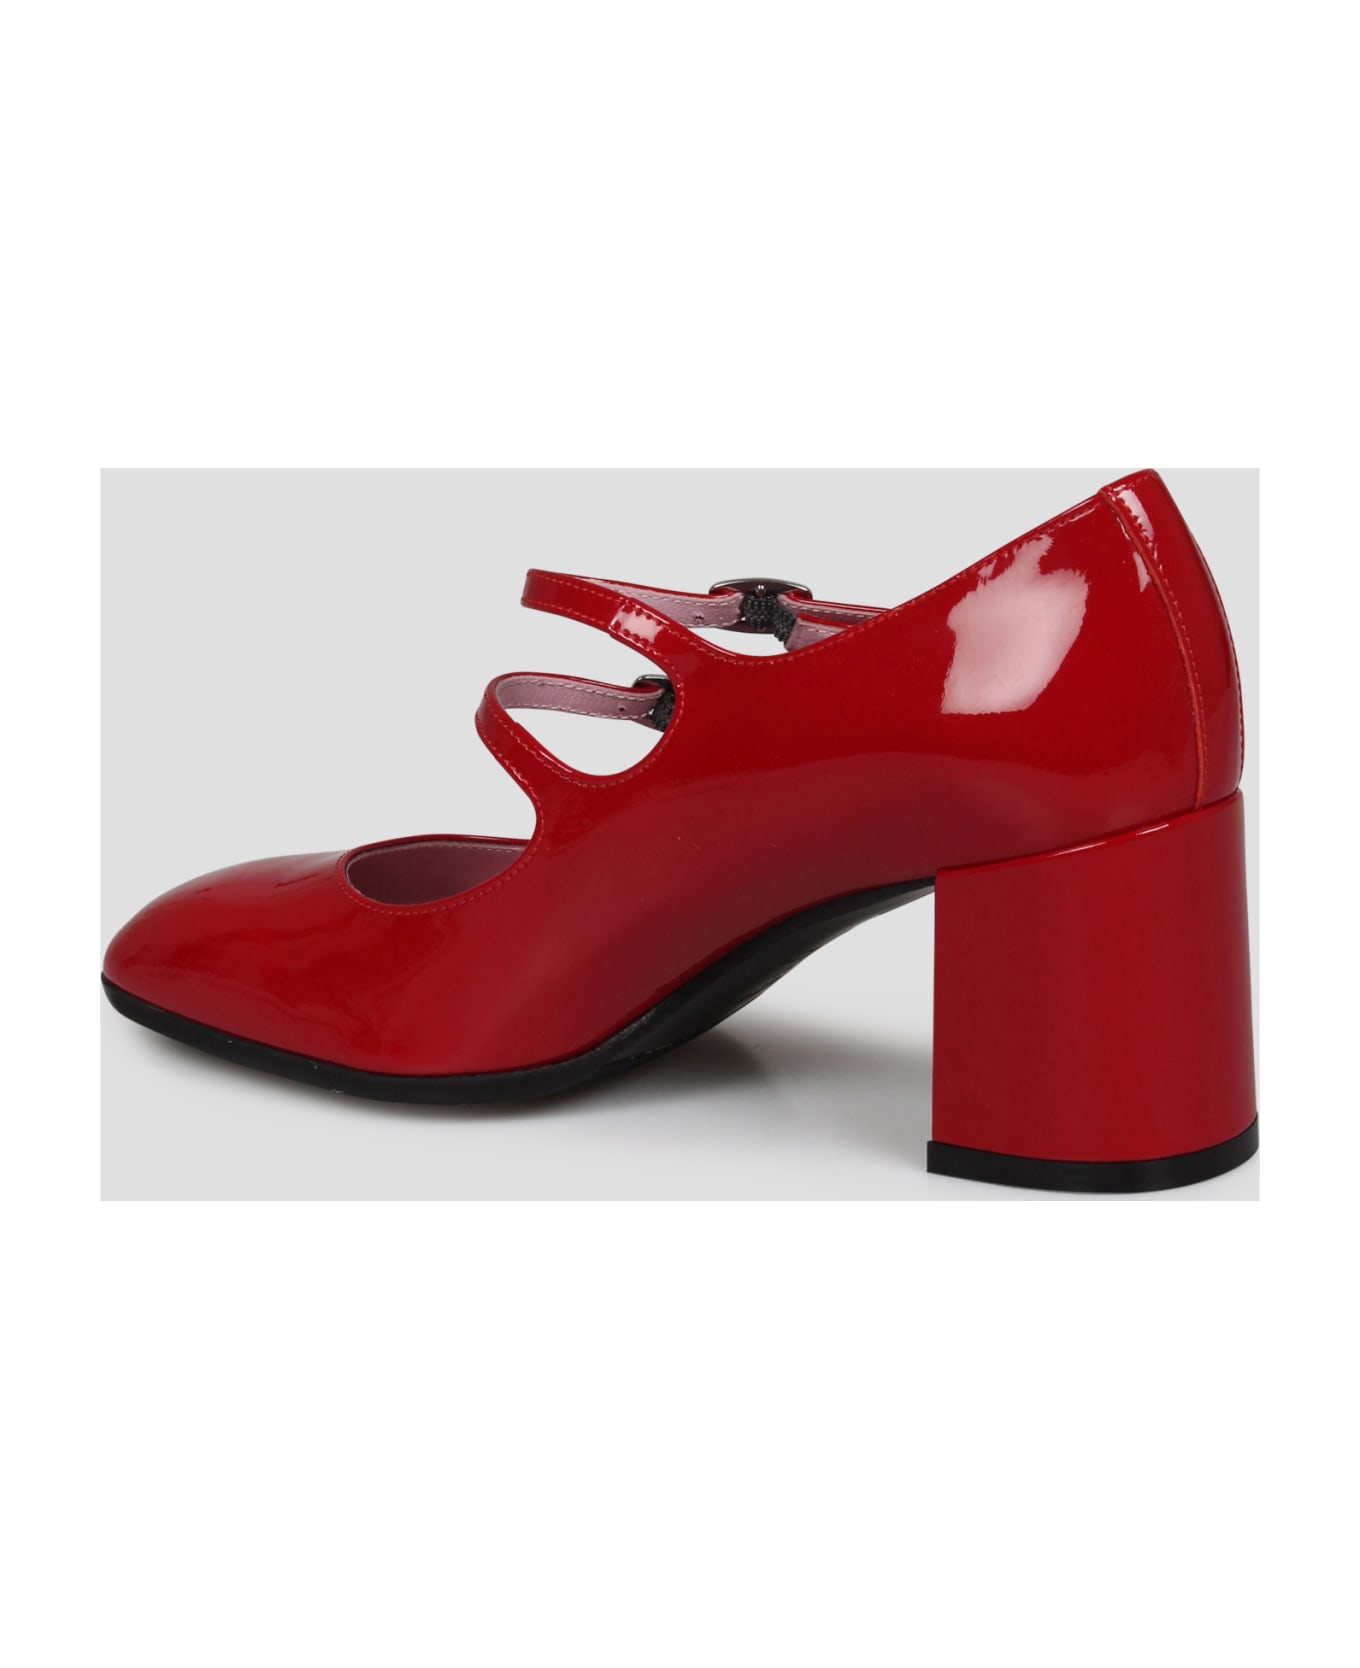 Carel Alice Mary Jane Pumps - Red ハイヒール